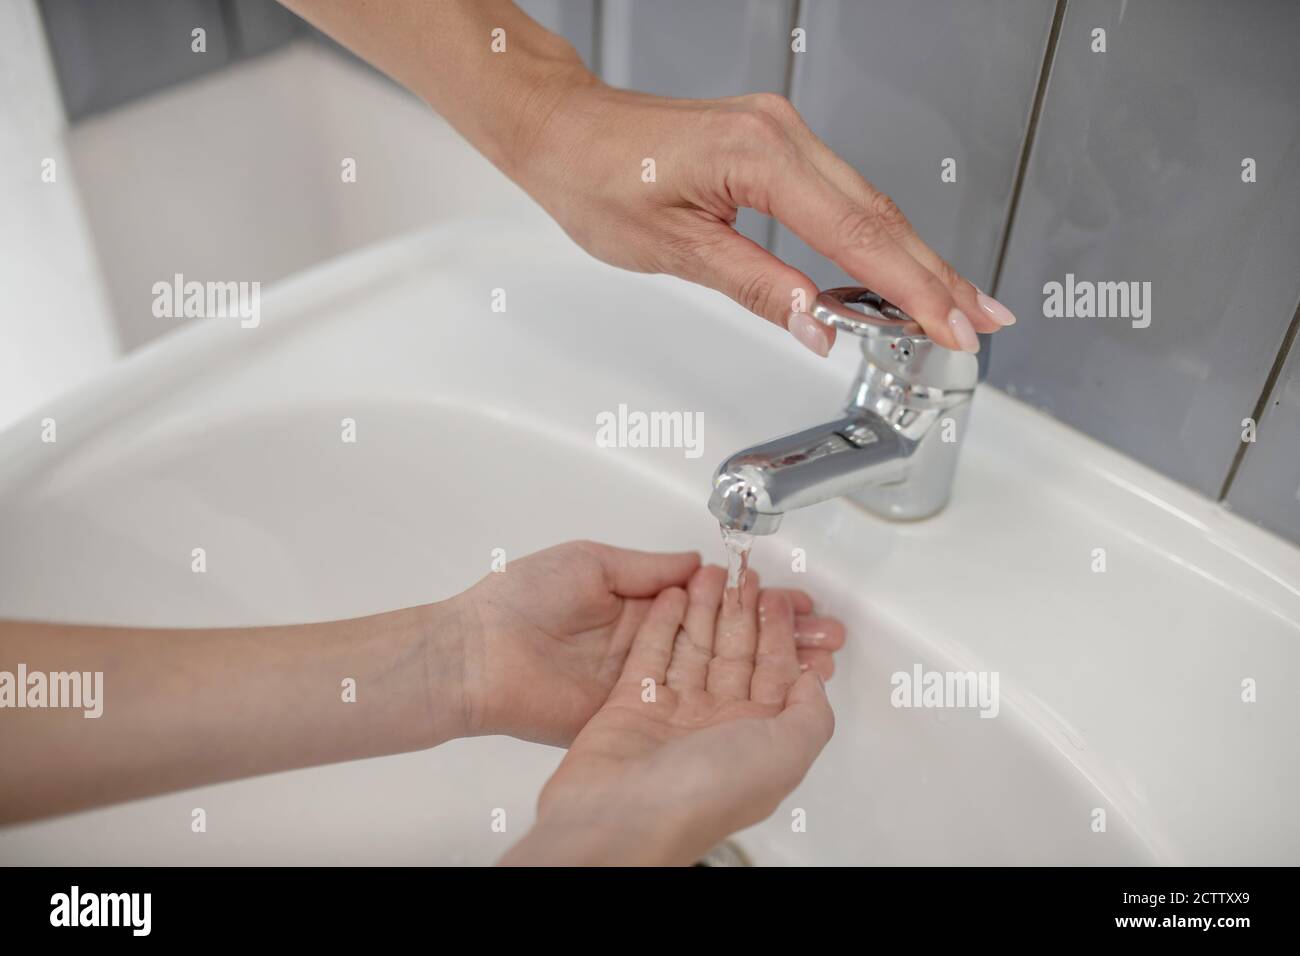 Close up picture of a kid washing hands in the bathroom Stock Photo